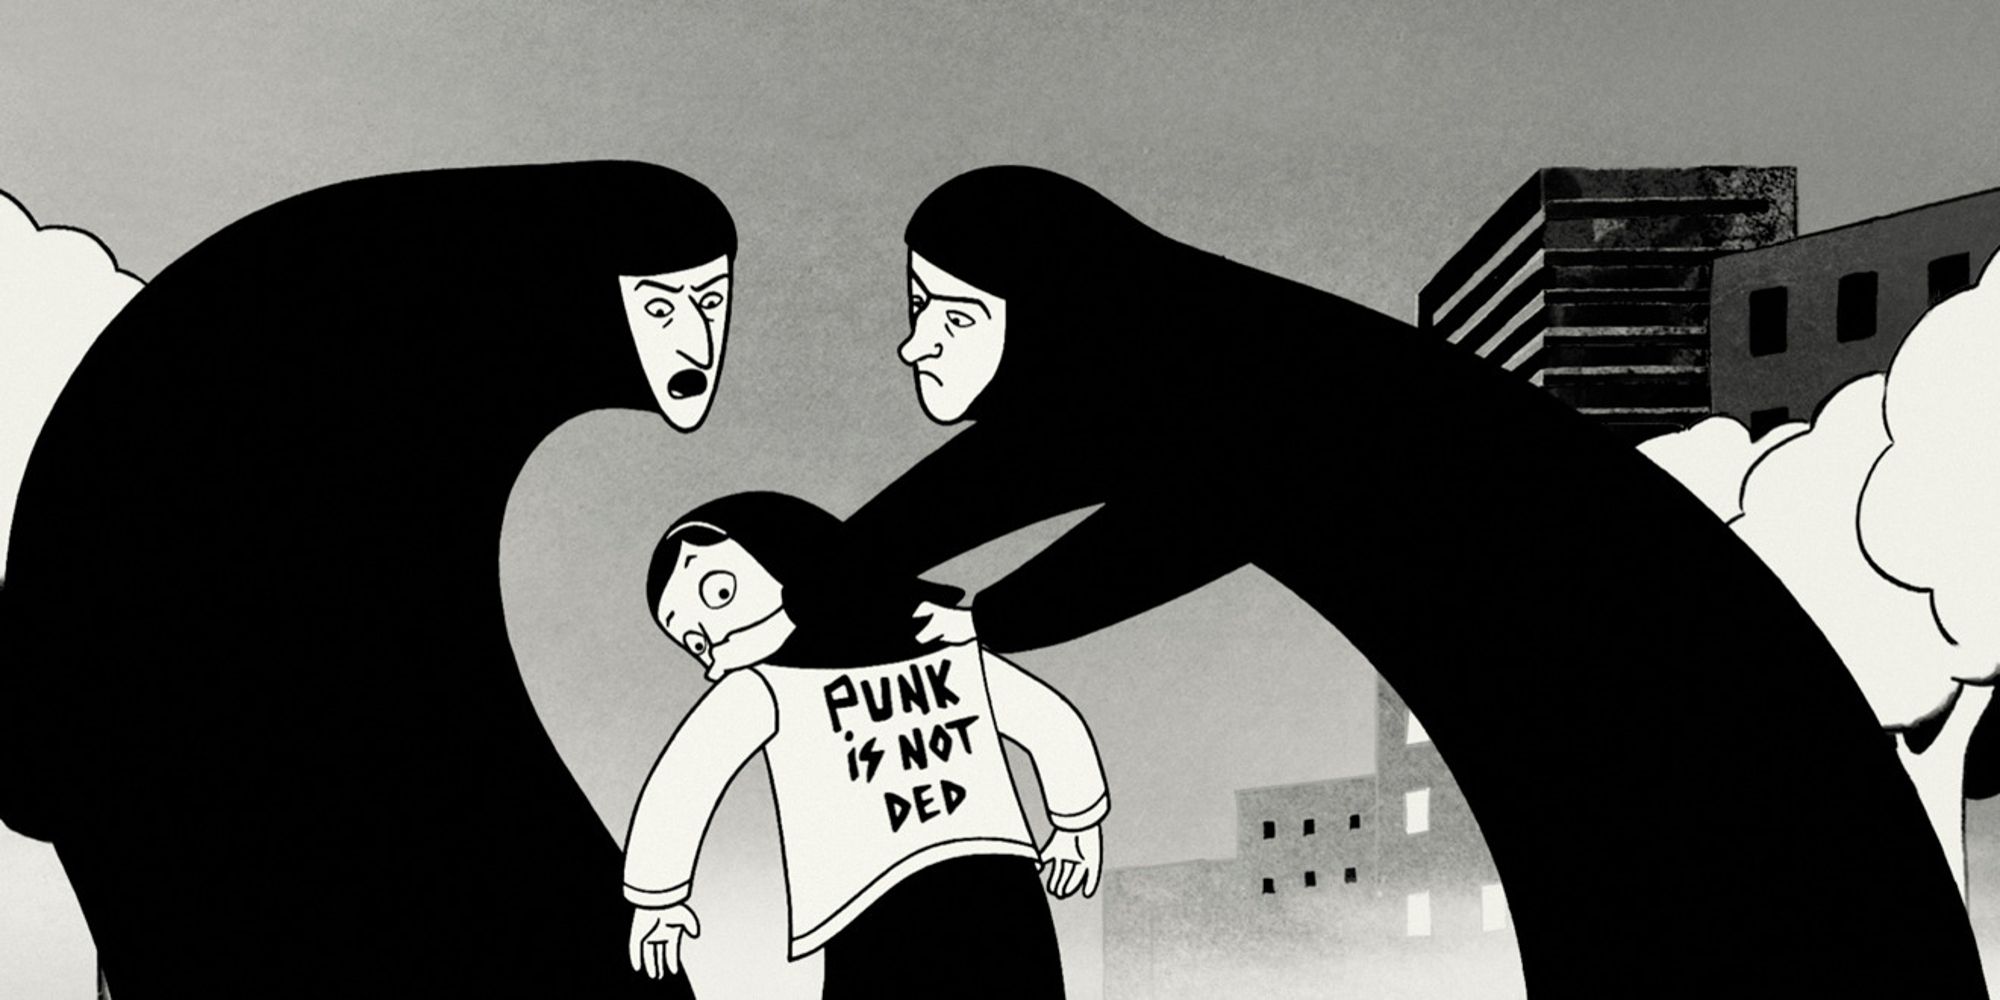 A scene from Persepolis